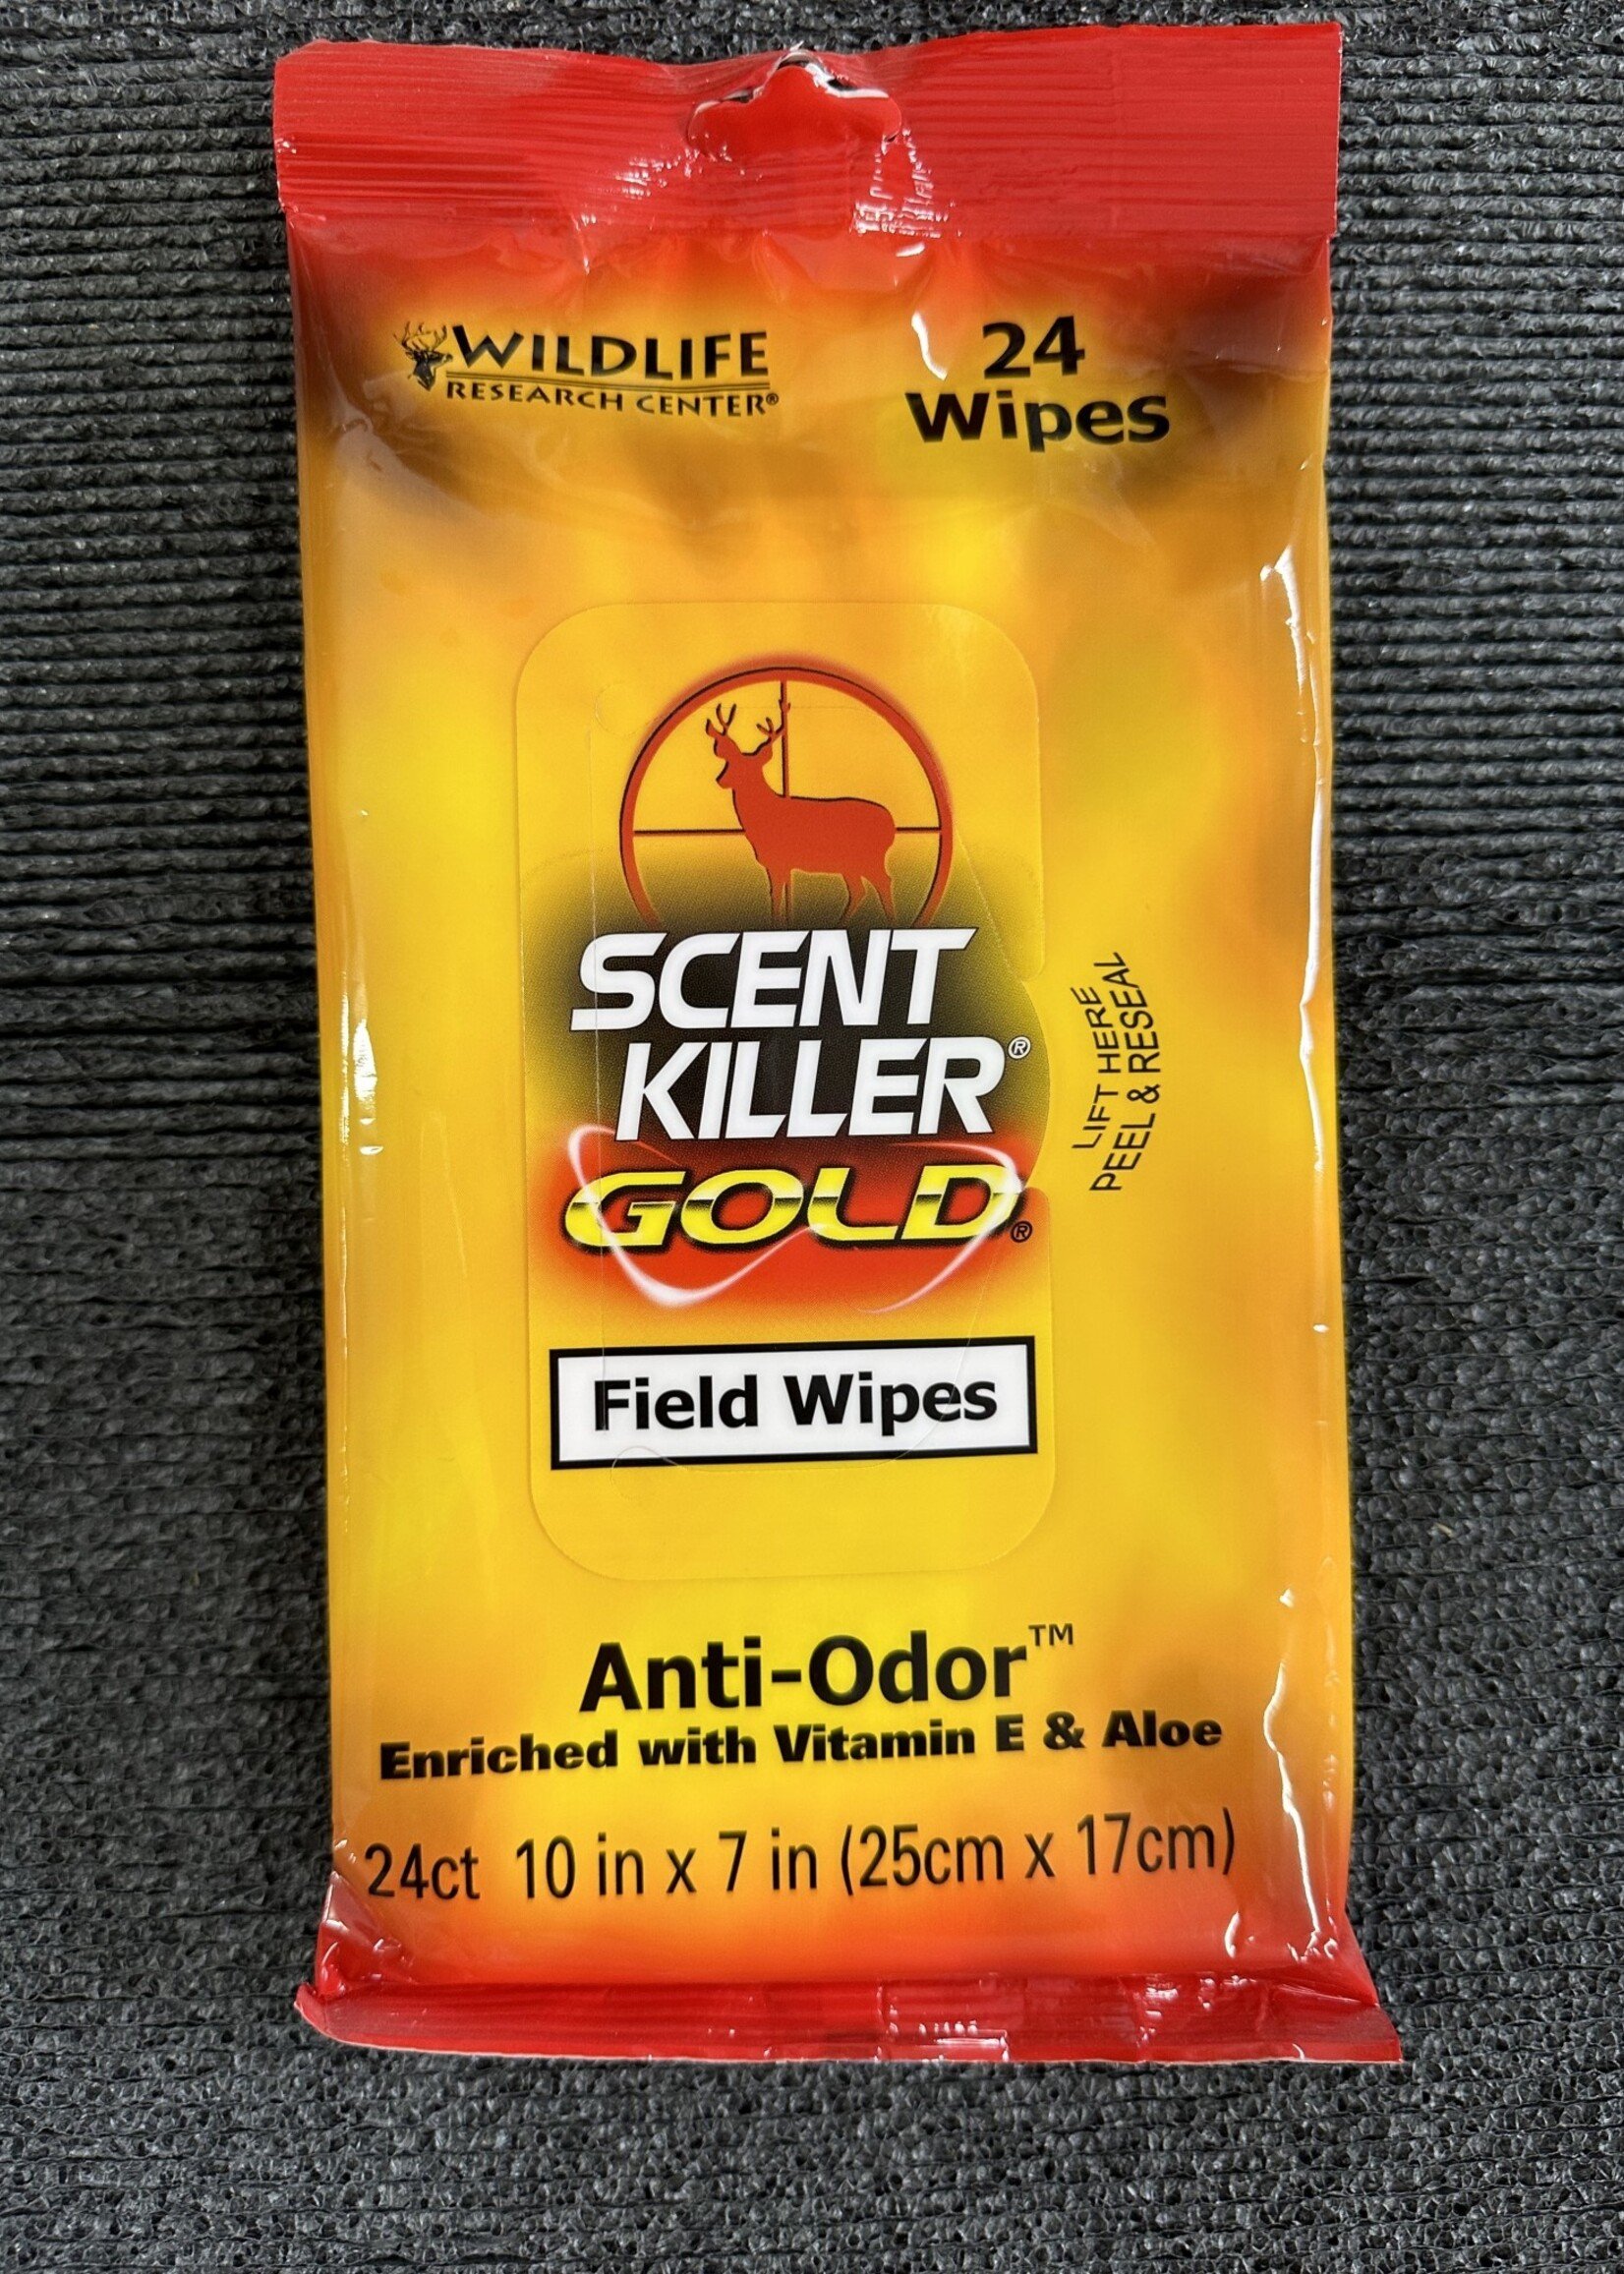 WILDLIFE RESEARCH SCENT KILLER GOLD FIELD WIPES